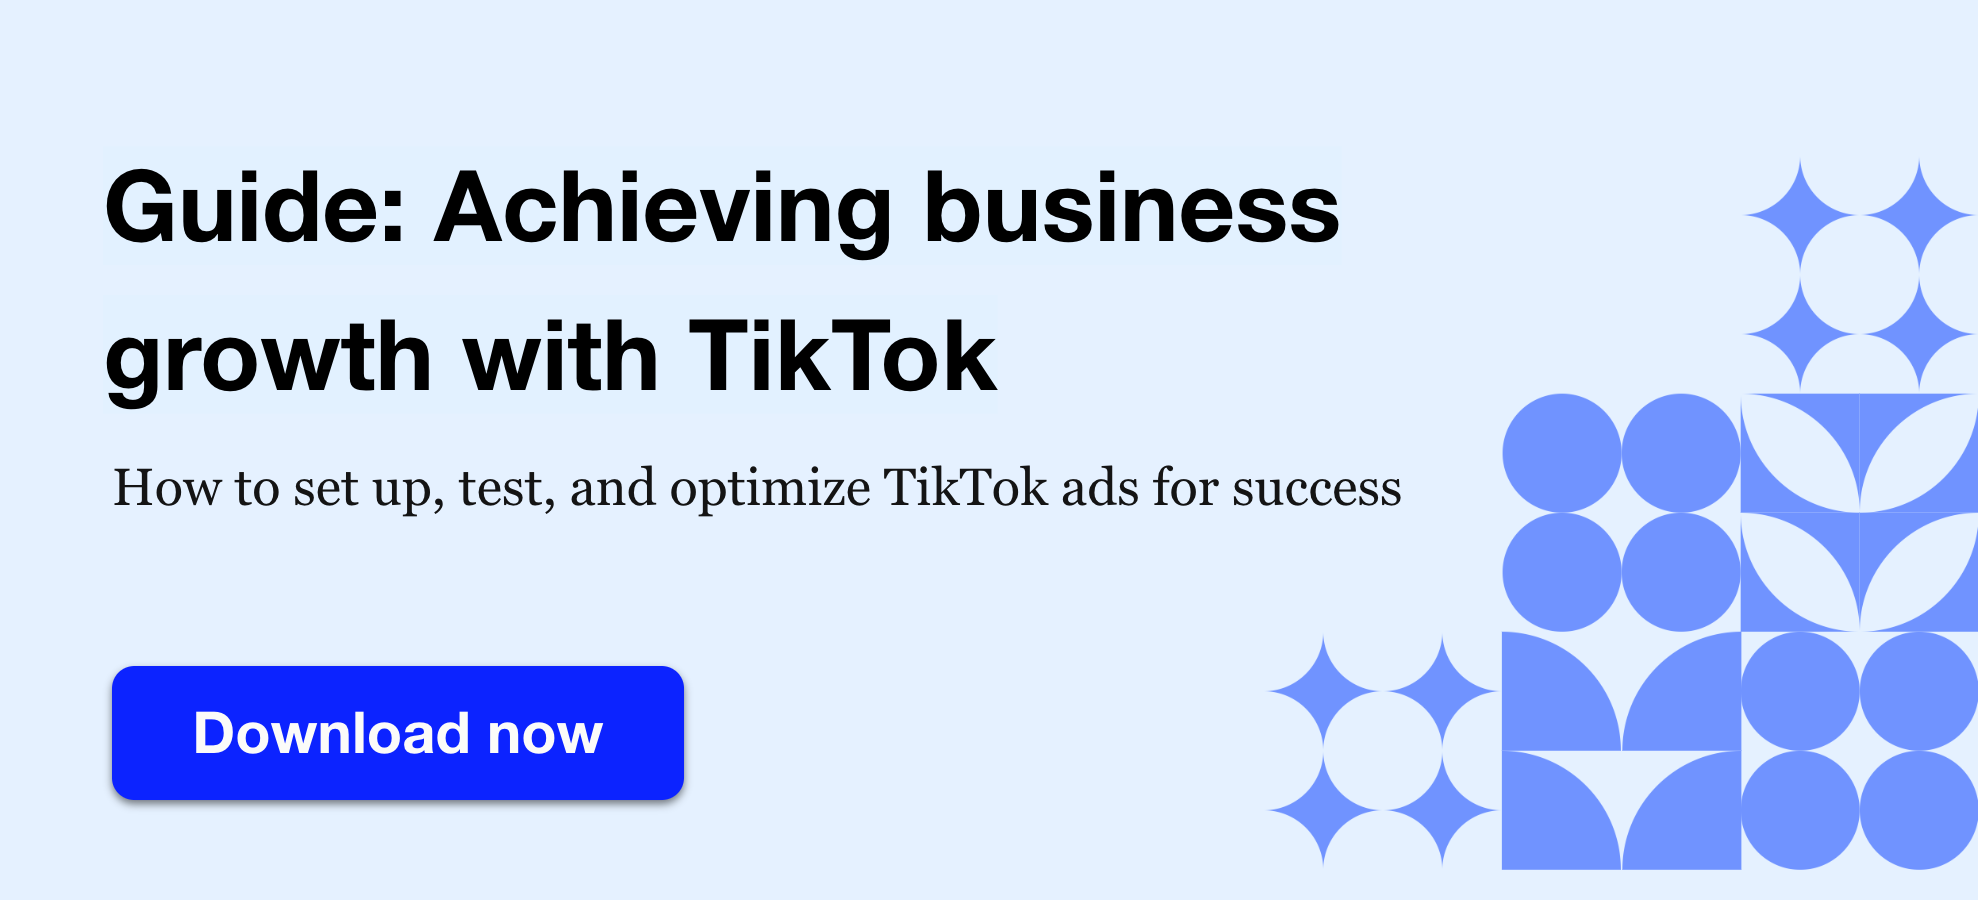 Button to download BMG360's guide to achieving business growth TikTok